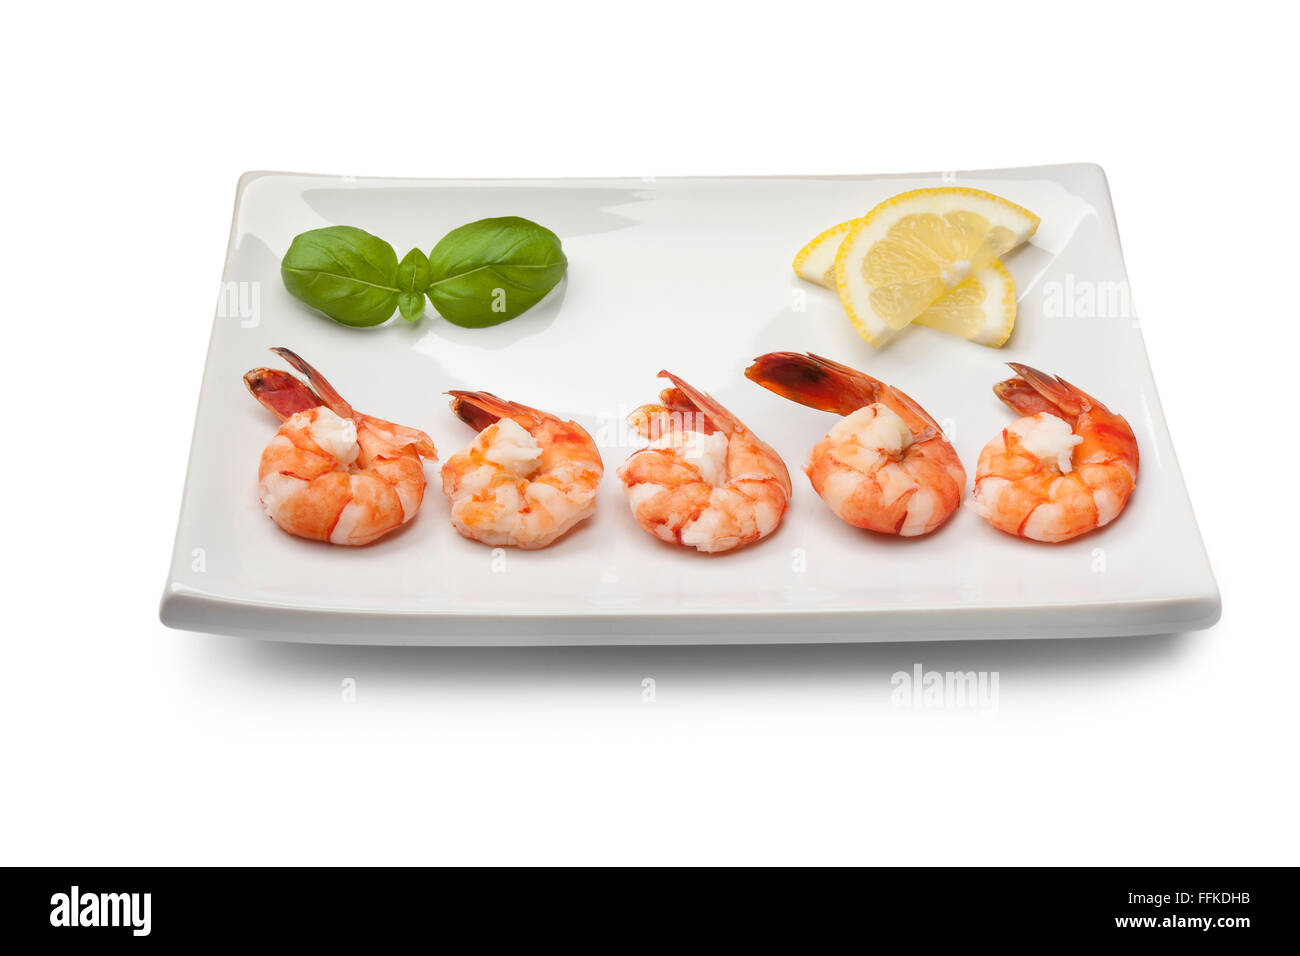 Cooked shrimps with lemon and basil leaves on a dish on white background Stock Photo